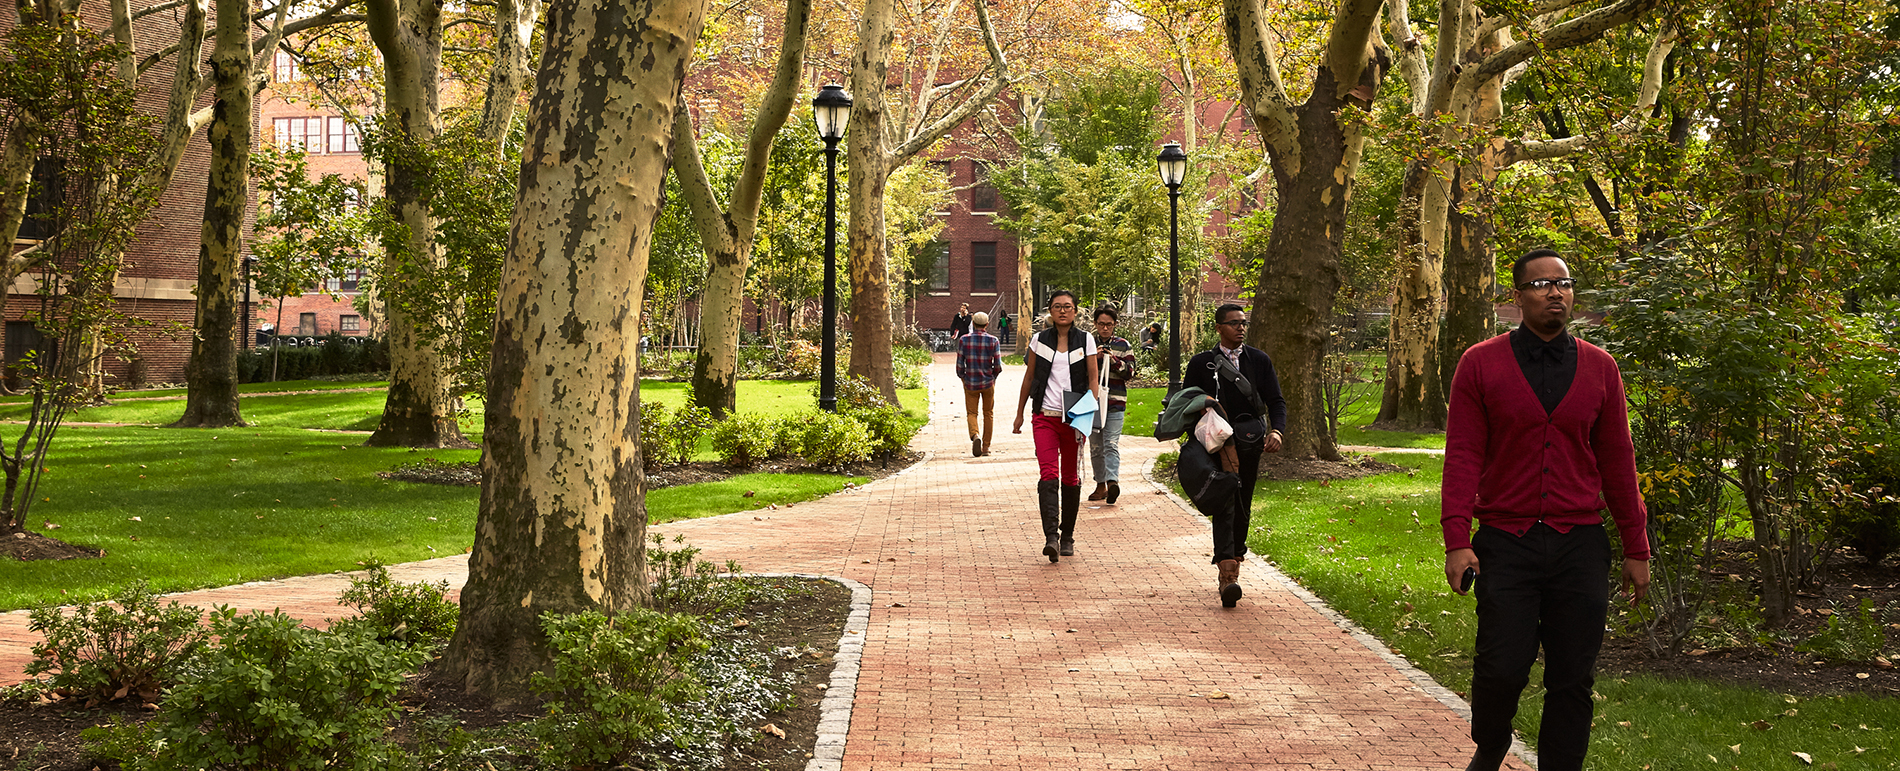 Students walk along a red brick path going through a park with buildings in the background.